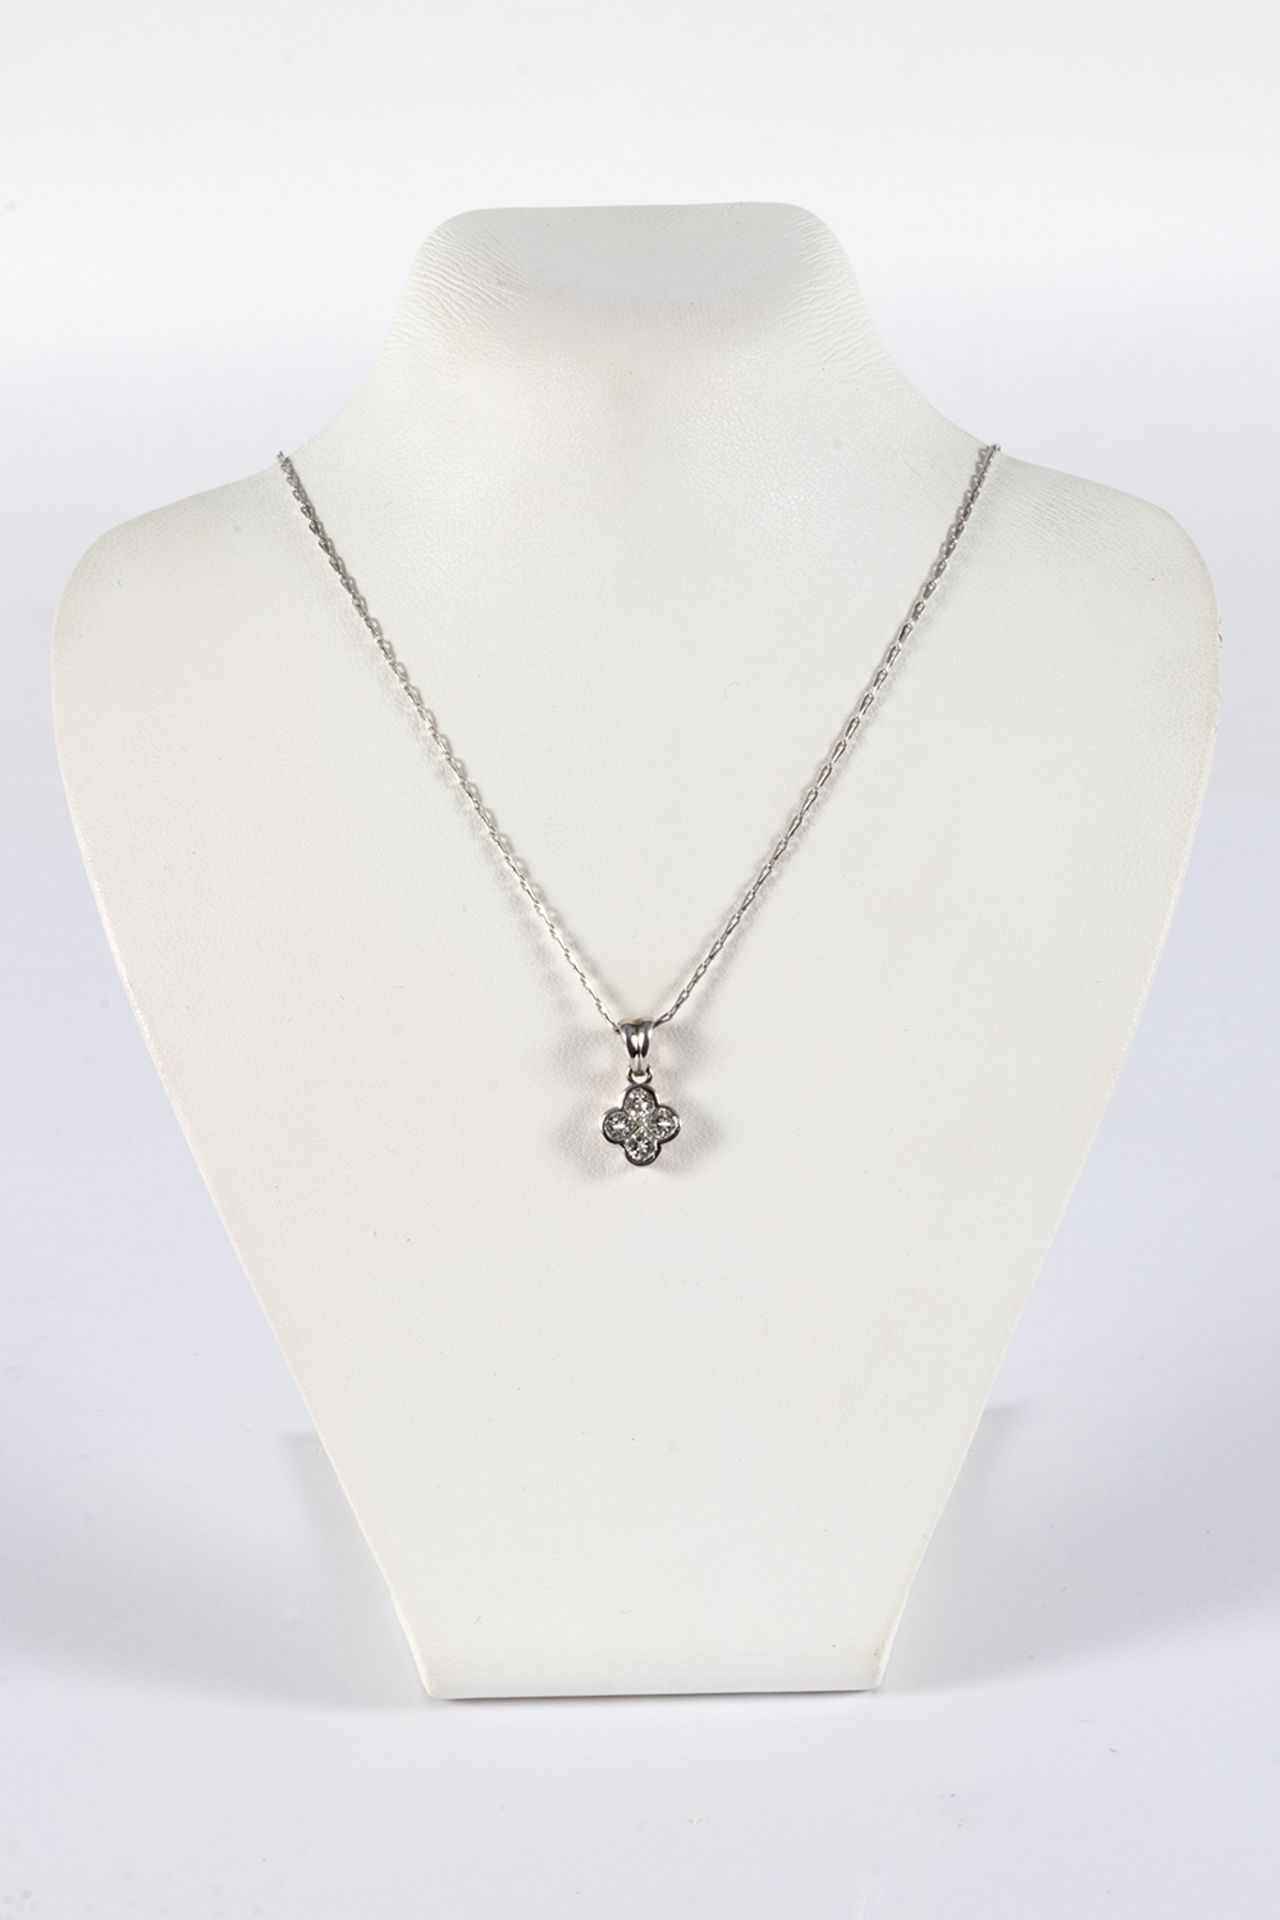 Pendant with chain in white gold and goatee-cut diamonds.